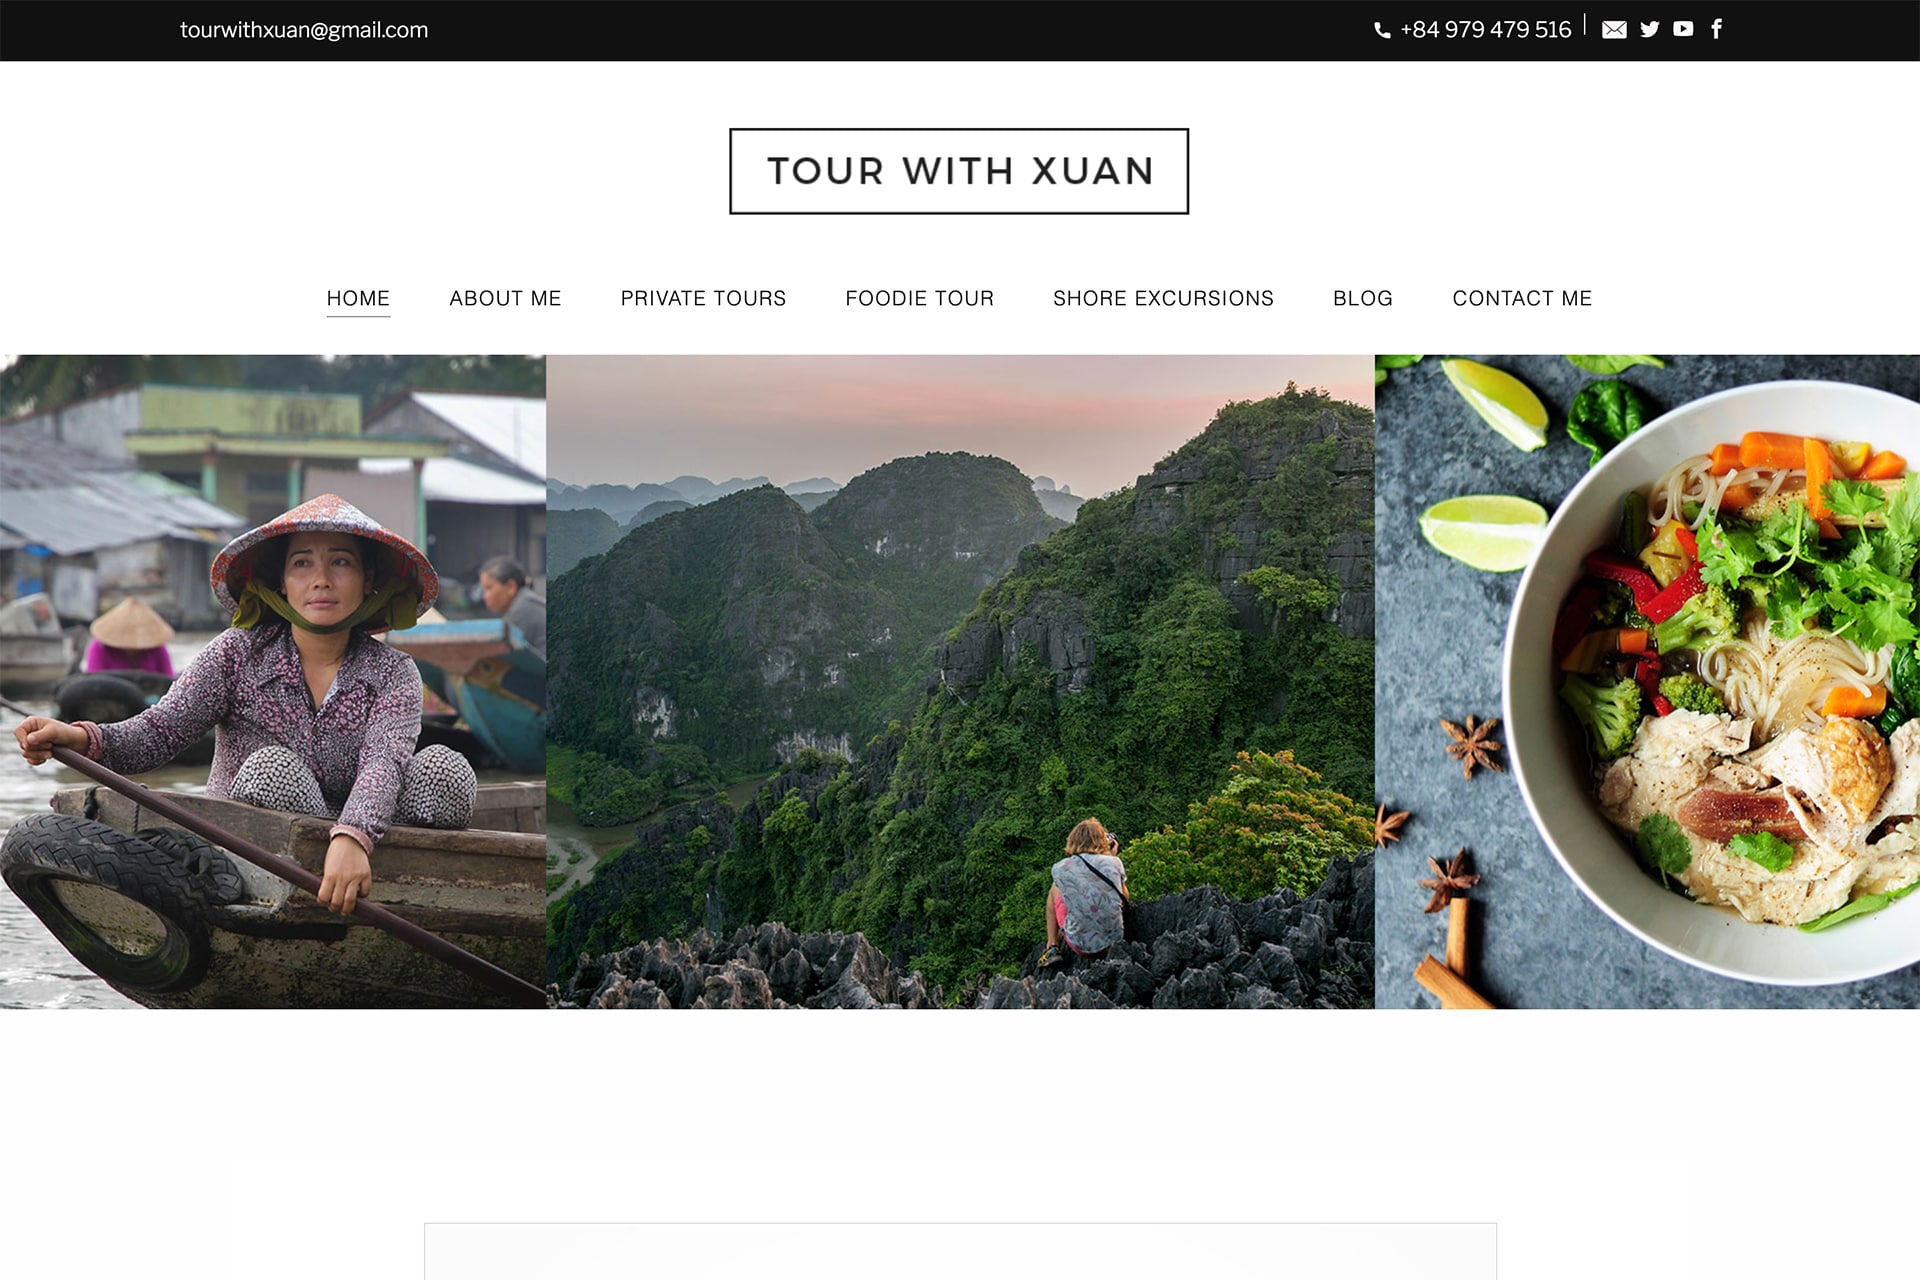 Weebly website example 26 - Tour With Xuan